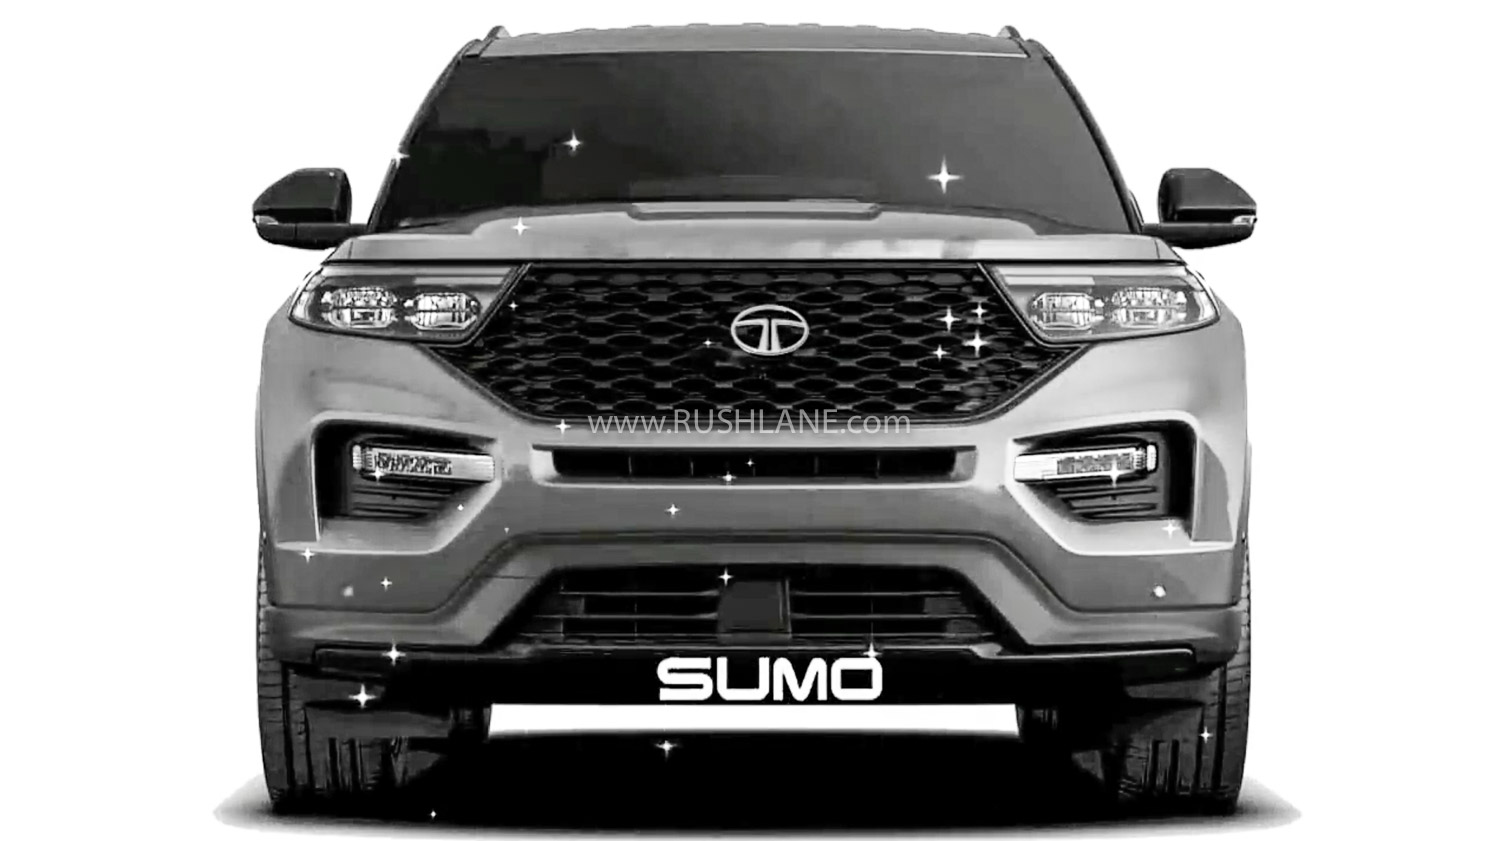 2021 Tata Sumo Based On Landwind X7 And Ford Explorer Render Video